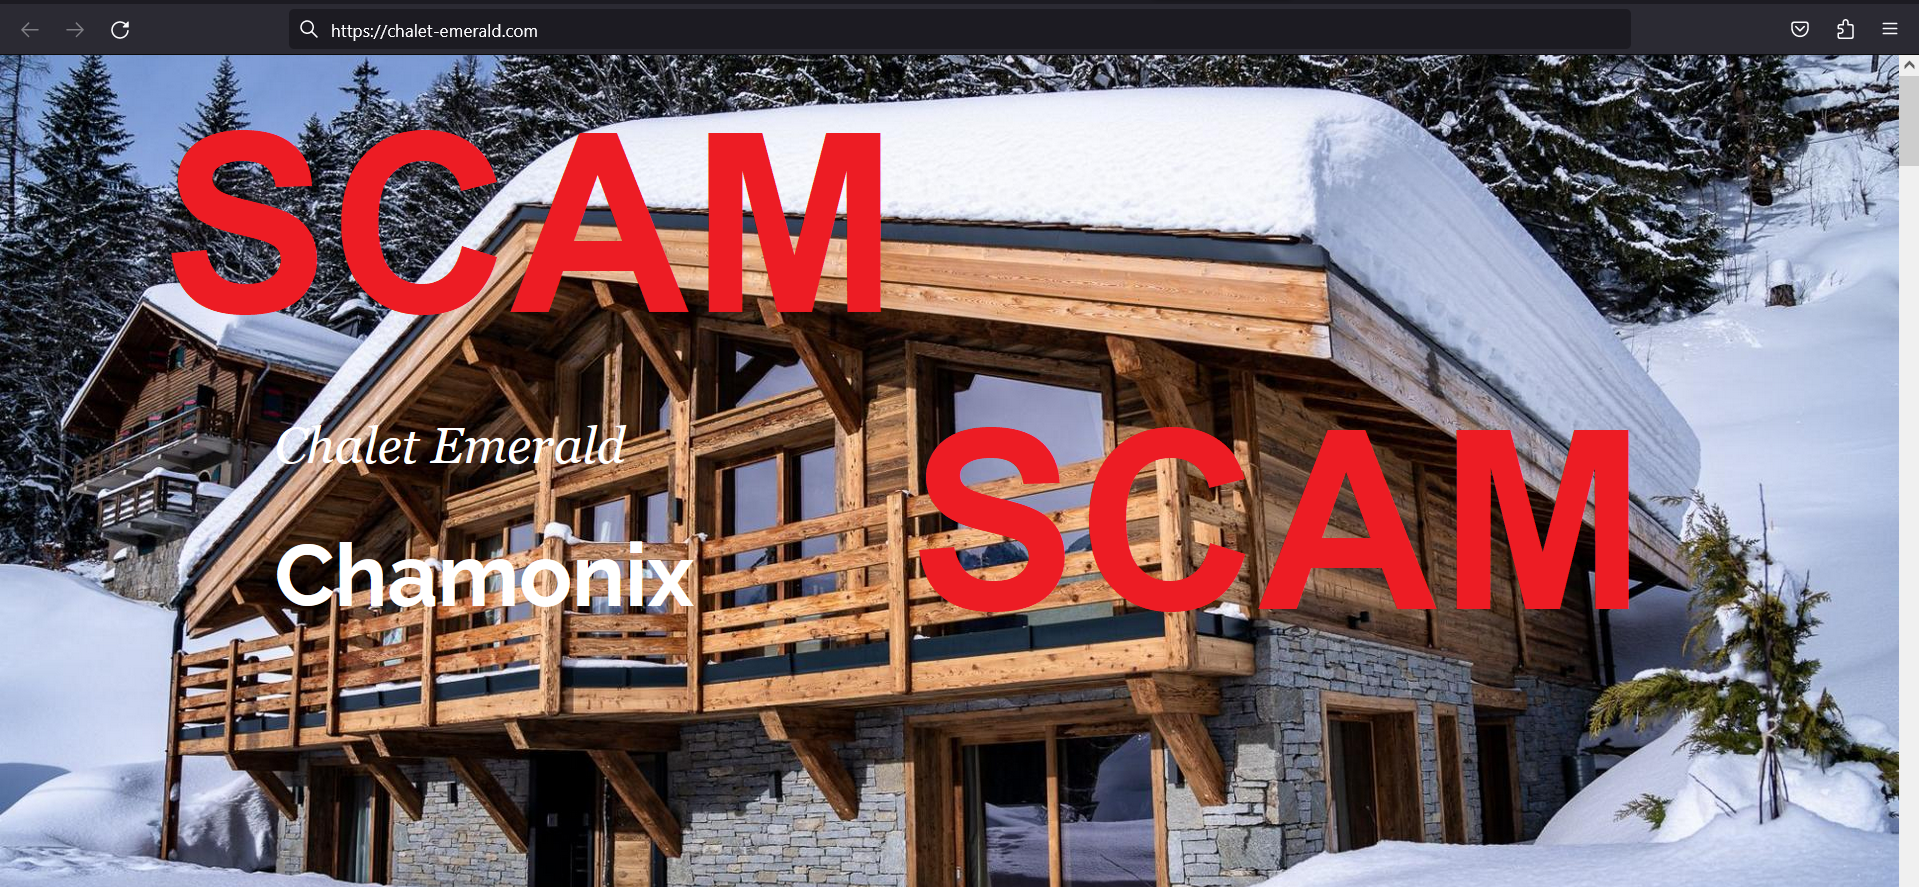 You are currently viewing Fraudulent website: chalet-emerald.com SCAM SCAM SCAM